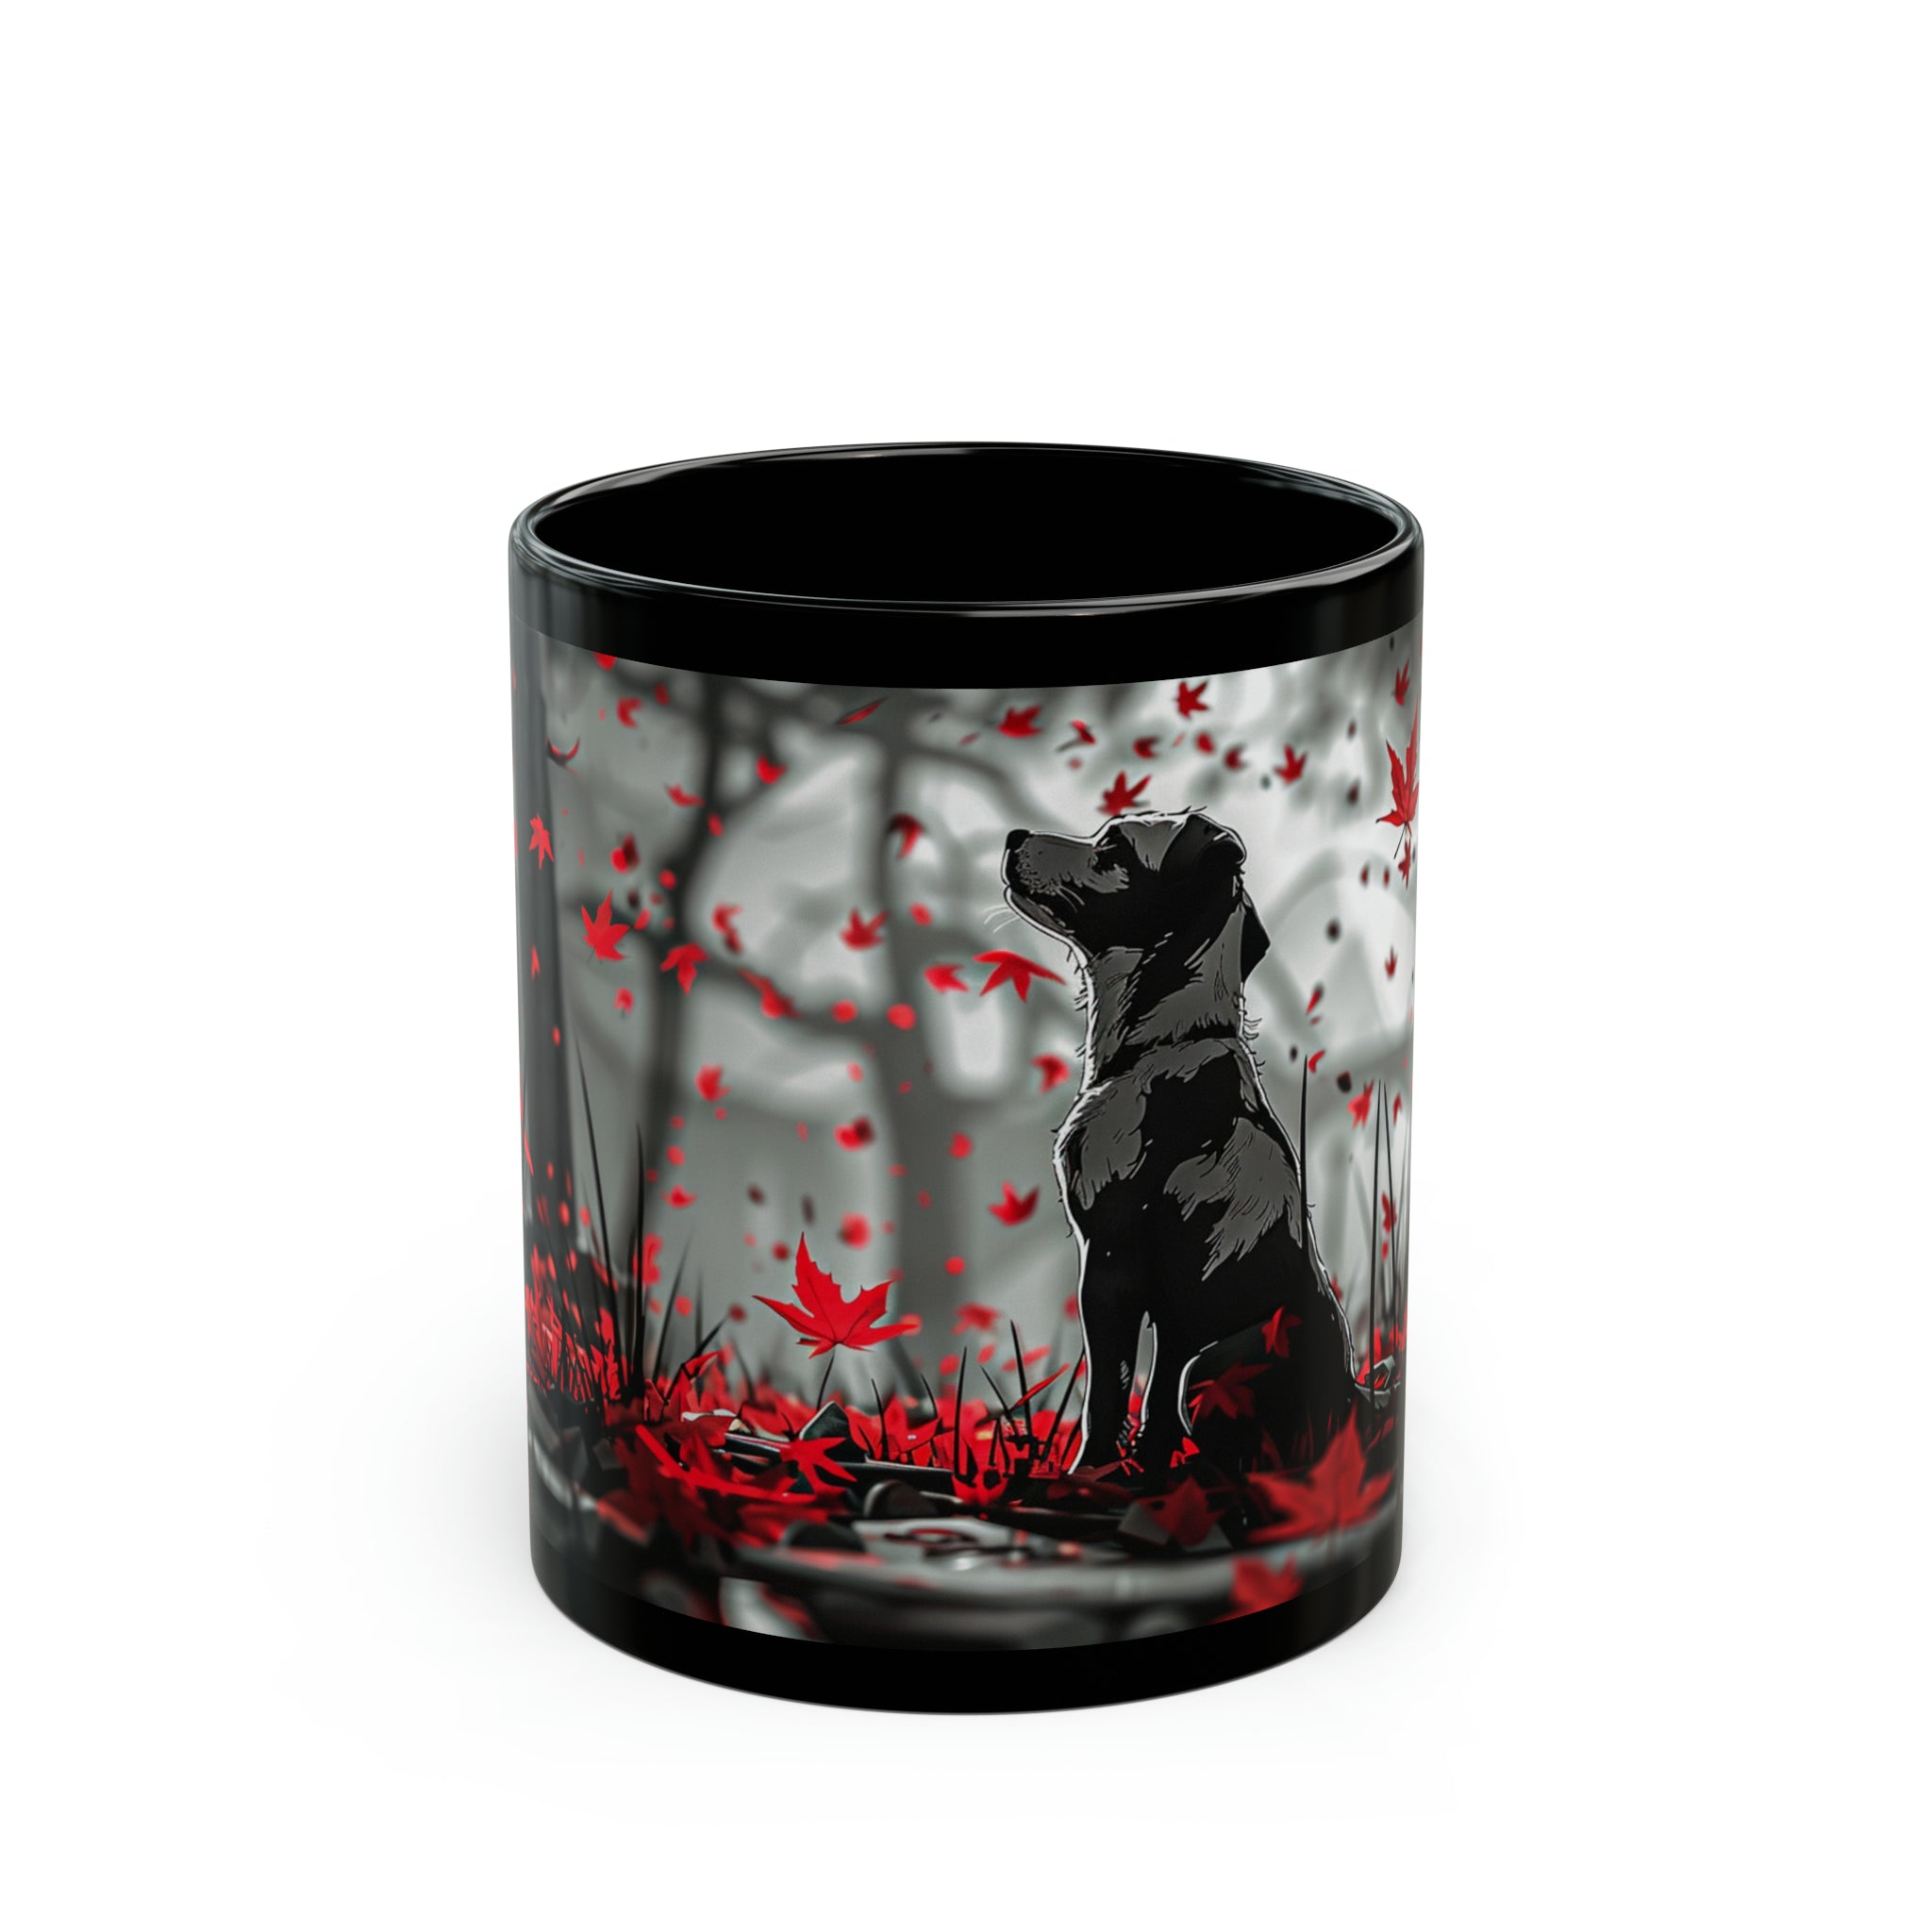 The image showcases a sleek, black ceramic mug, adorned with an artistic rendering of a loyal dog, depicted as a guardian angel. The design elegantly wraps around the mug, visible on both the 11oz and 15oz versions, embodying the spirit of solemn loyalty and protection that our canine friends provide.